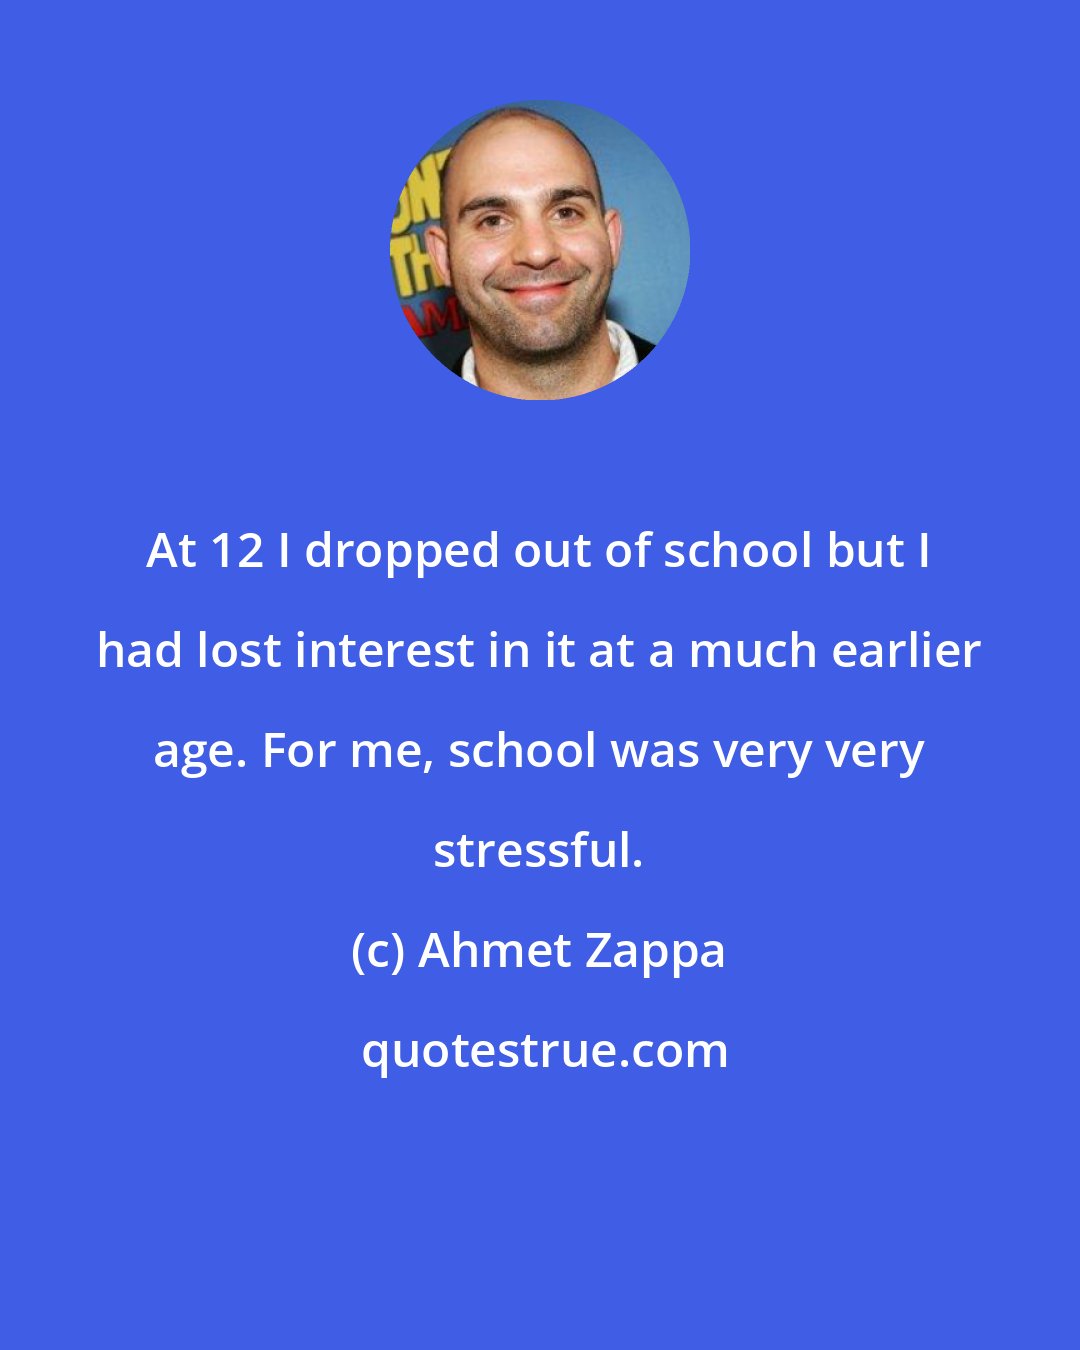 Ahmet Zappa: At 12 I dropped out of school but I had lost interest in it at a much earlier age. For me, school was very very stressful.